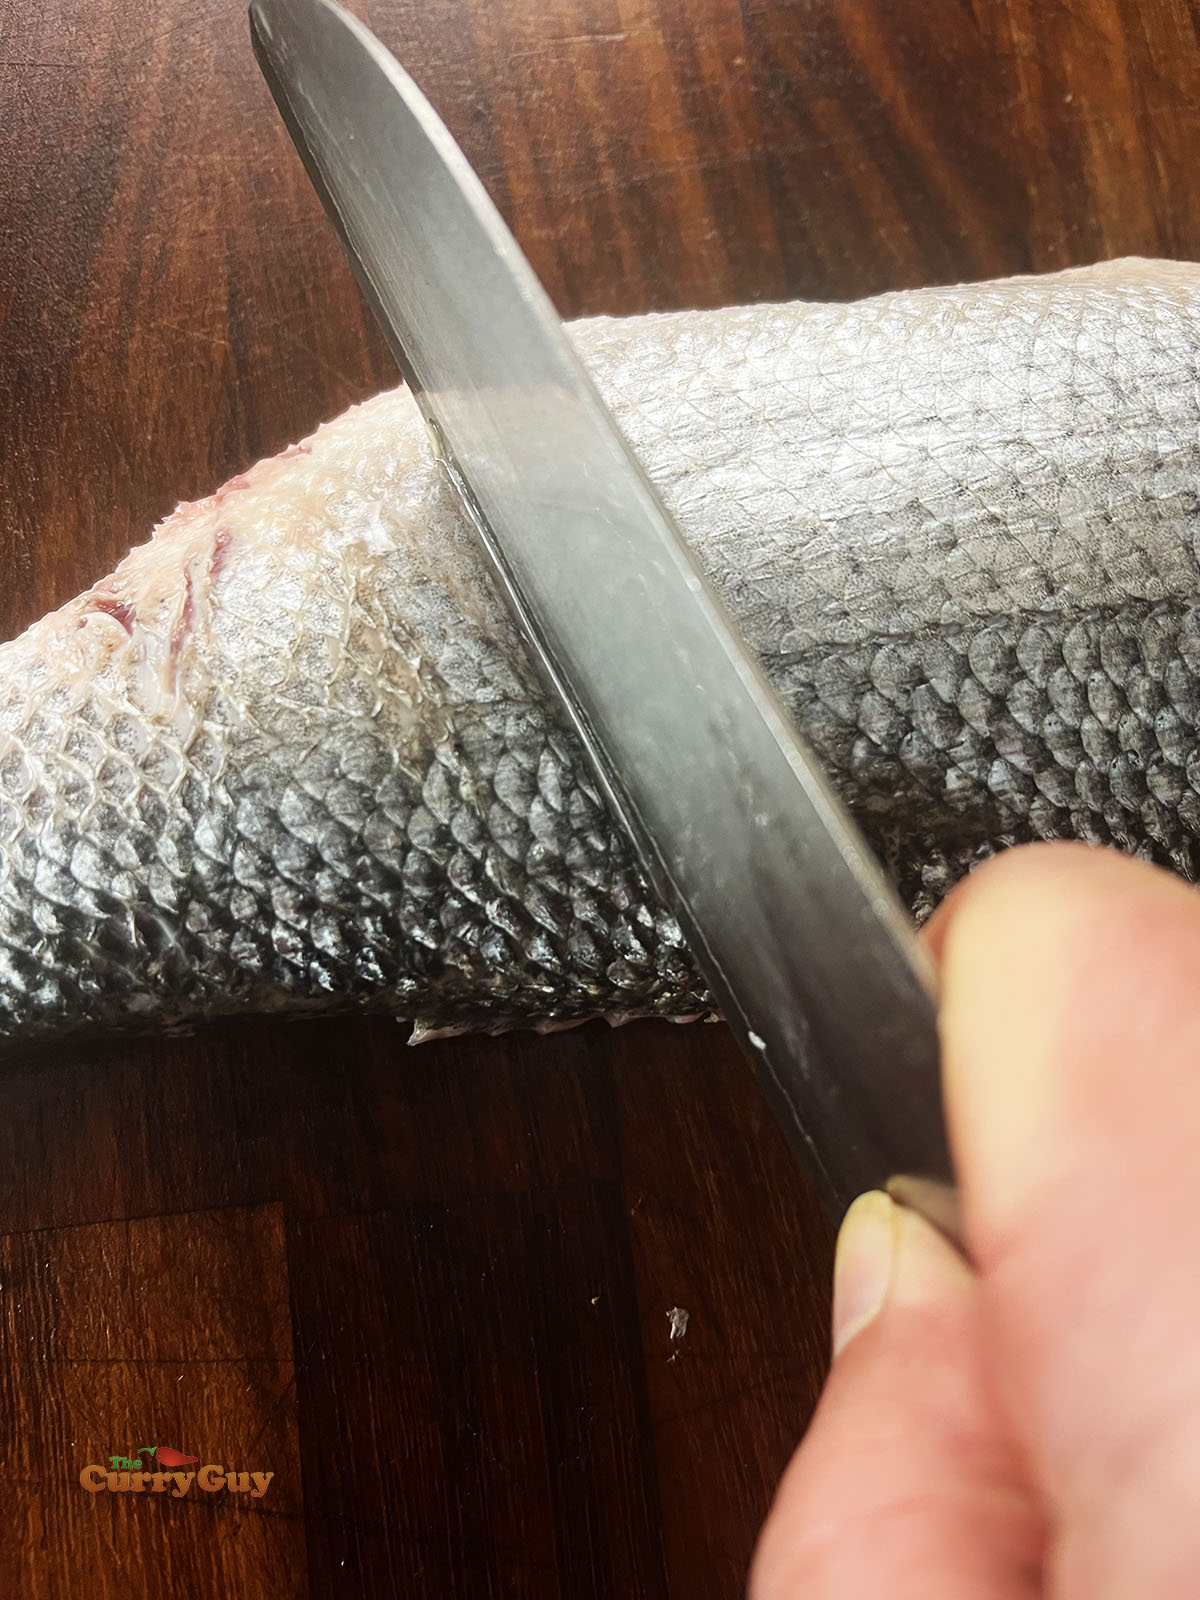 Scraping a knife over the skin of the fish to extract excess moisture.